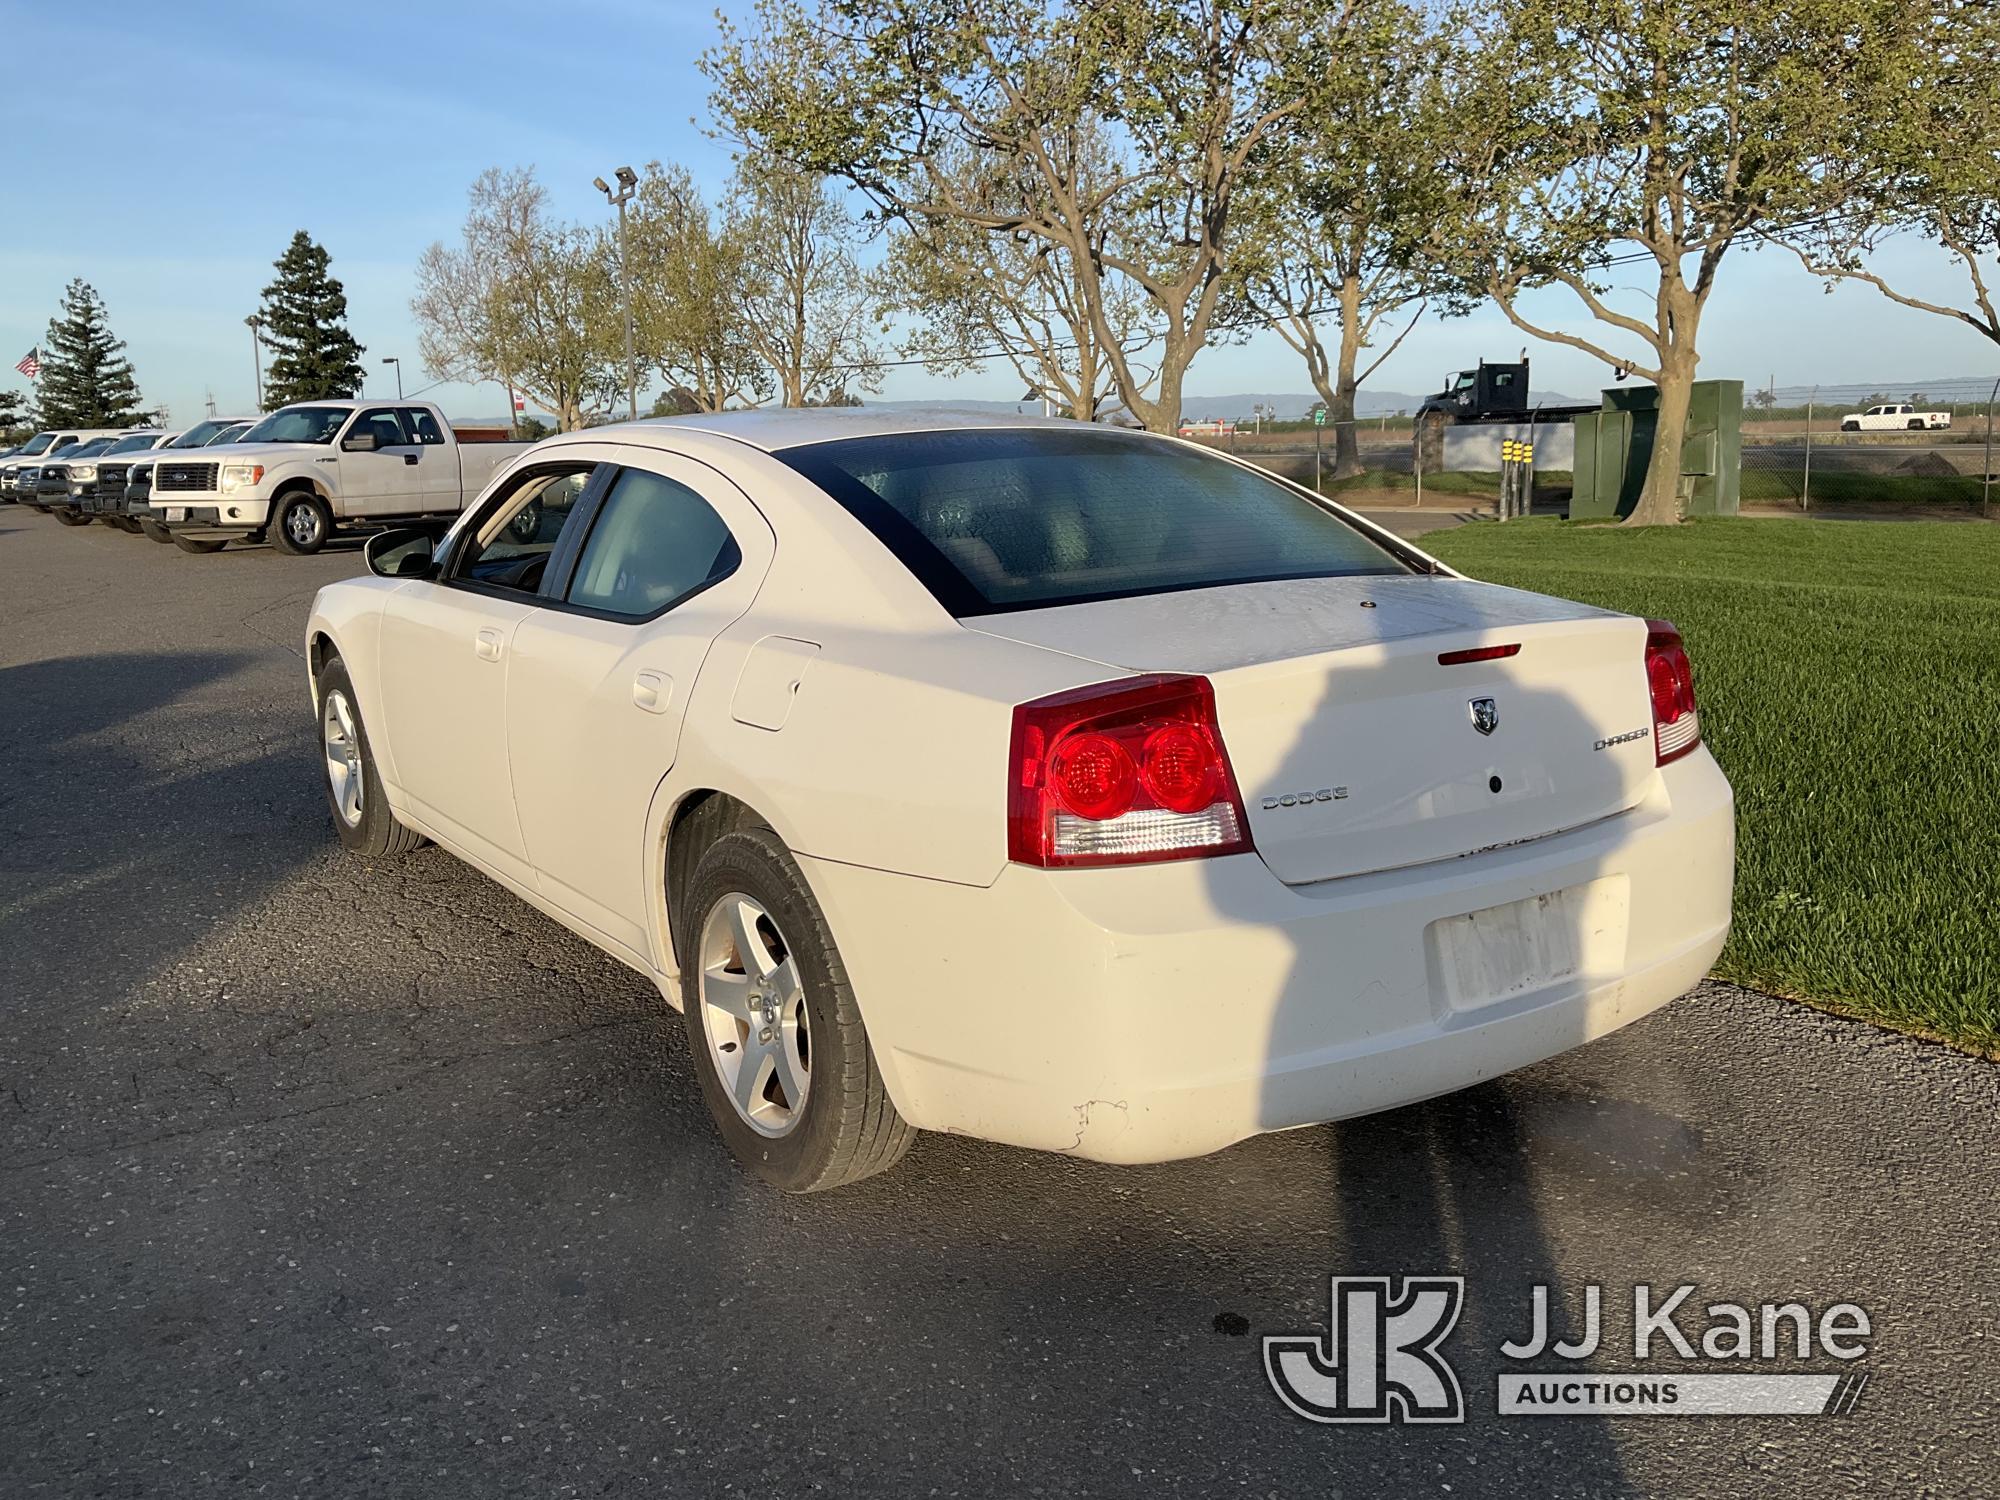 (Dixon, CA) 2010 Dodge Charger 4-Door Sedan Runs & Moves) (Has Electrical Problems, ABS Light On